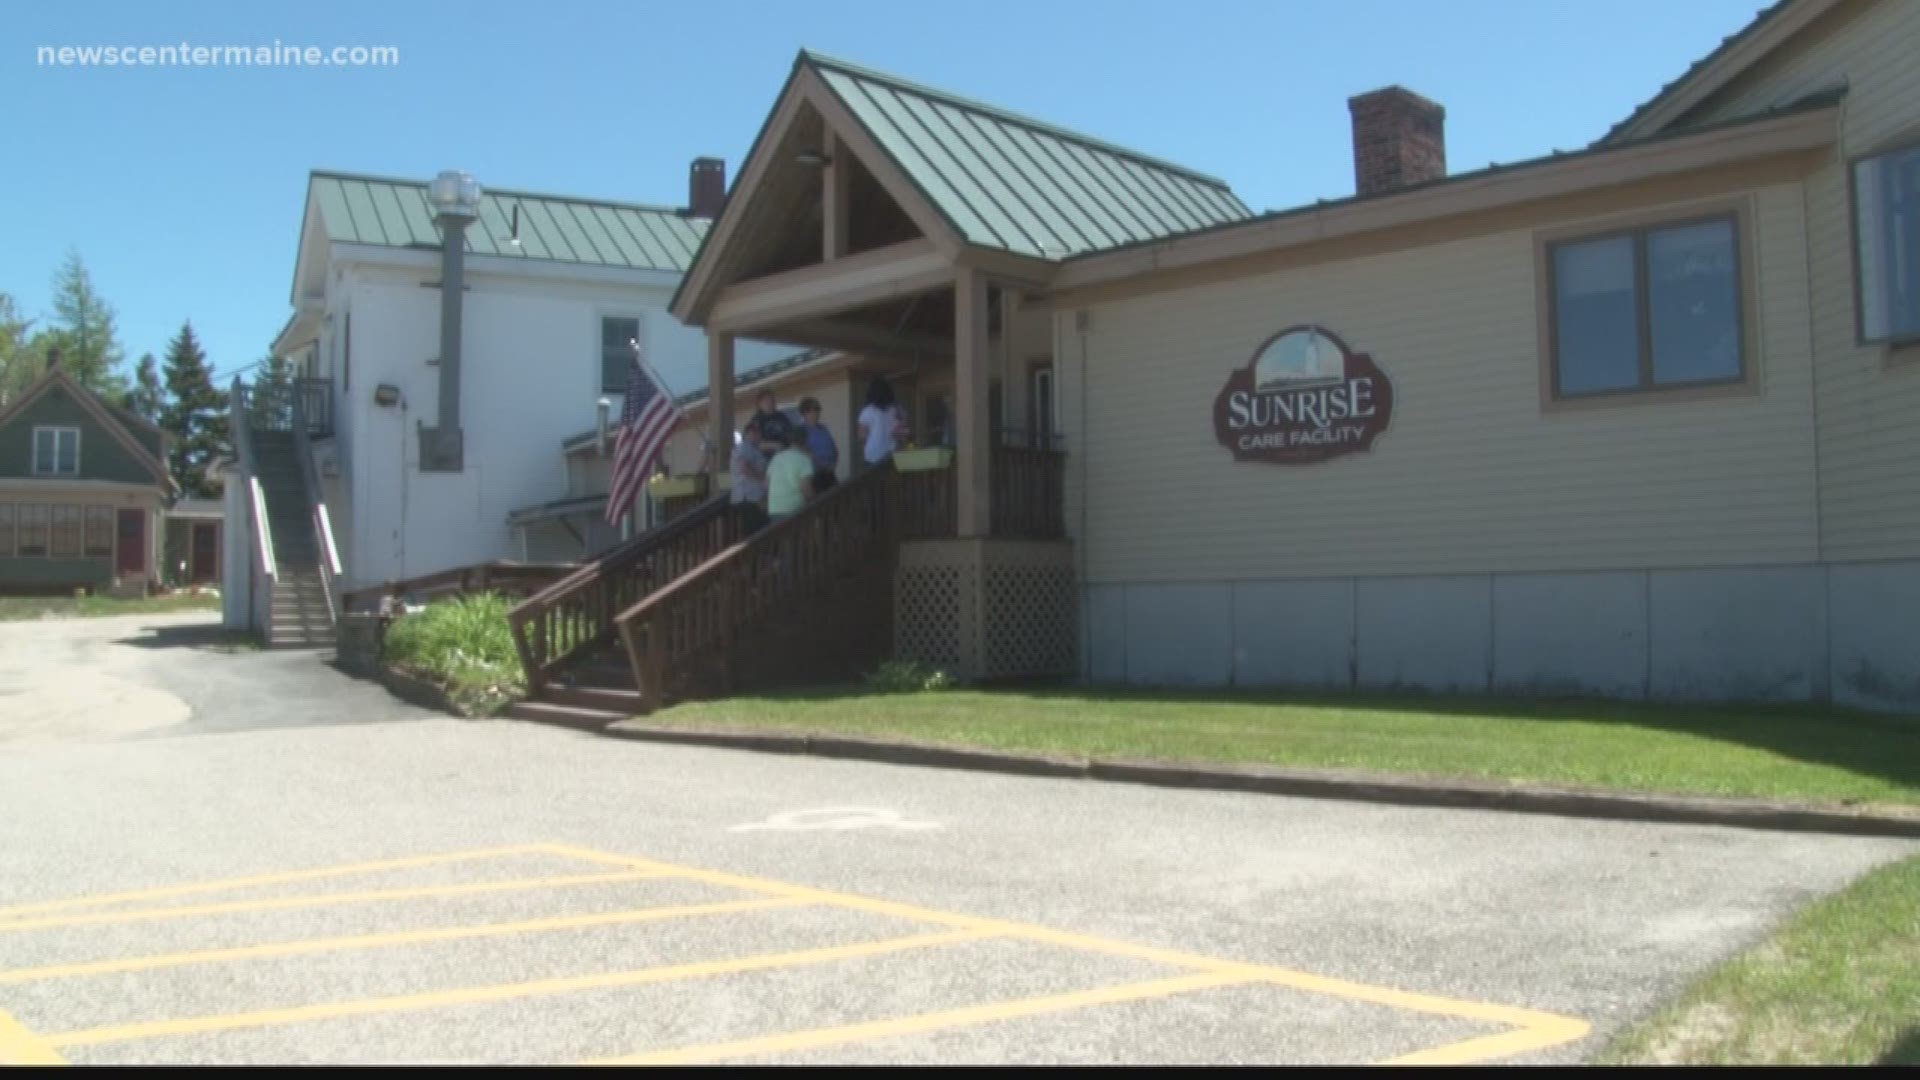 Community pushes back against planned closure of facility